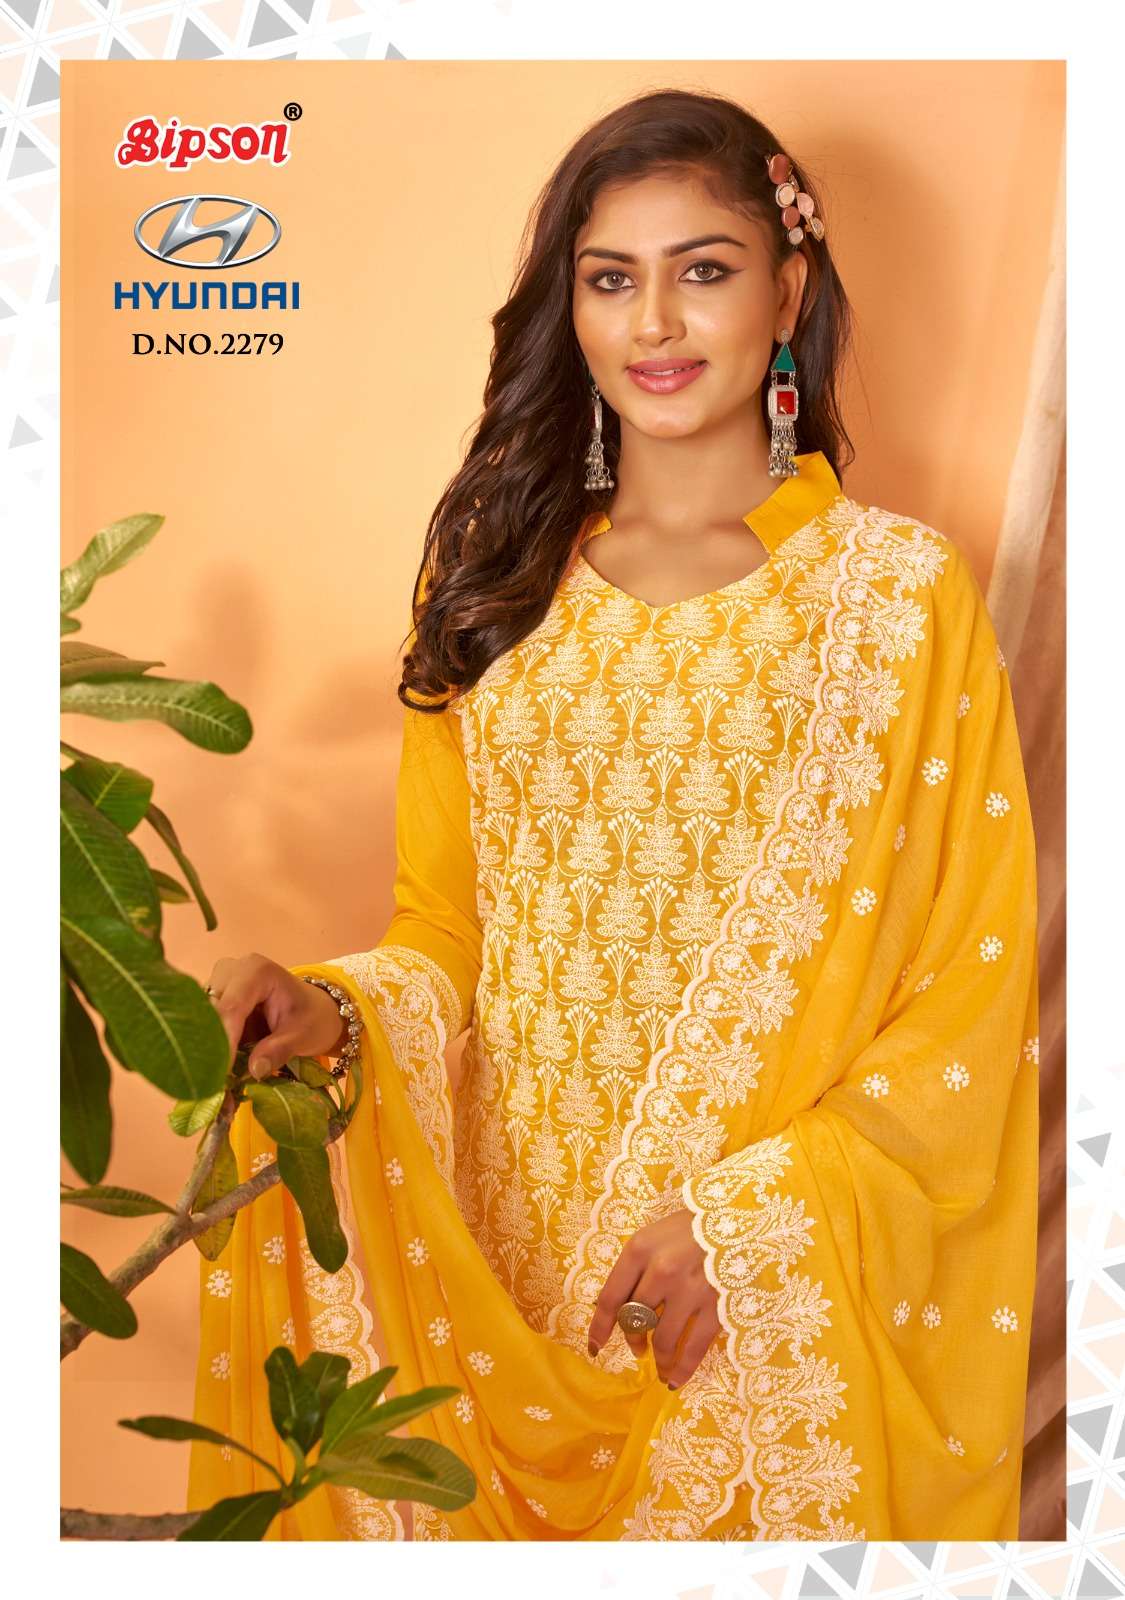 Bipson fashion Hyundai 2280 Yellow color Cotton with embroid...